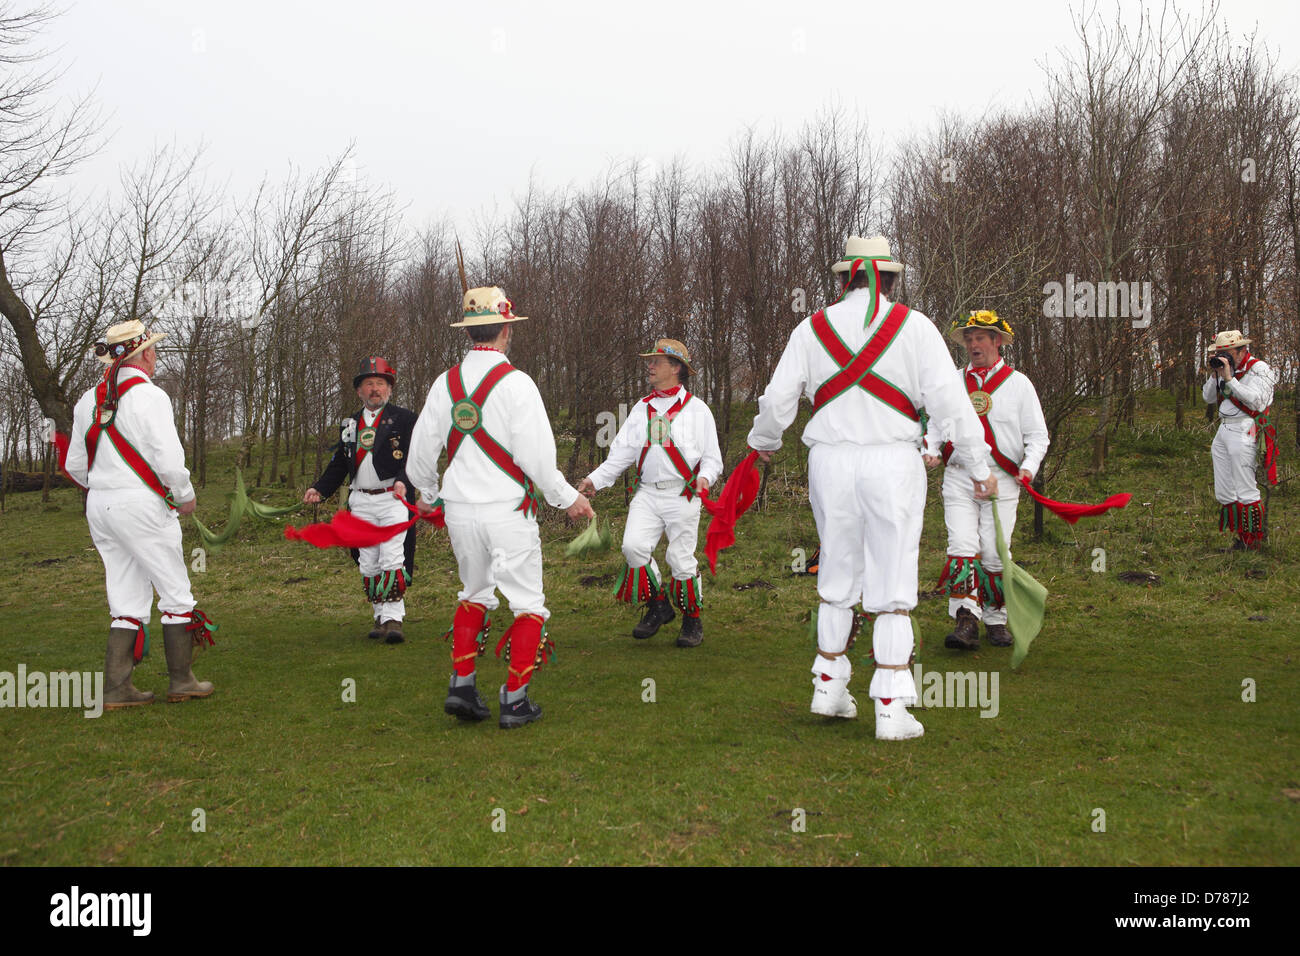 Chanctonbury Ring Morris Men celebrate May Day (1st May) with their traditional singing and dancing at Chanctonbury Ring, atop Chanctonbury Hill, East Sussex. Stock Photo